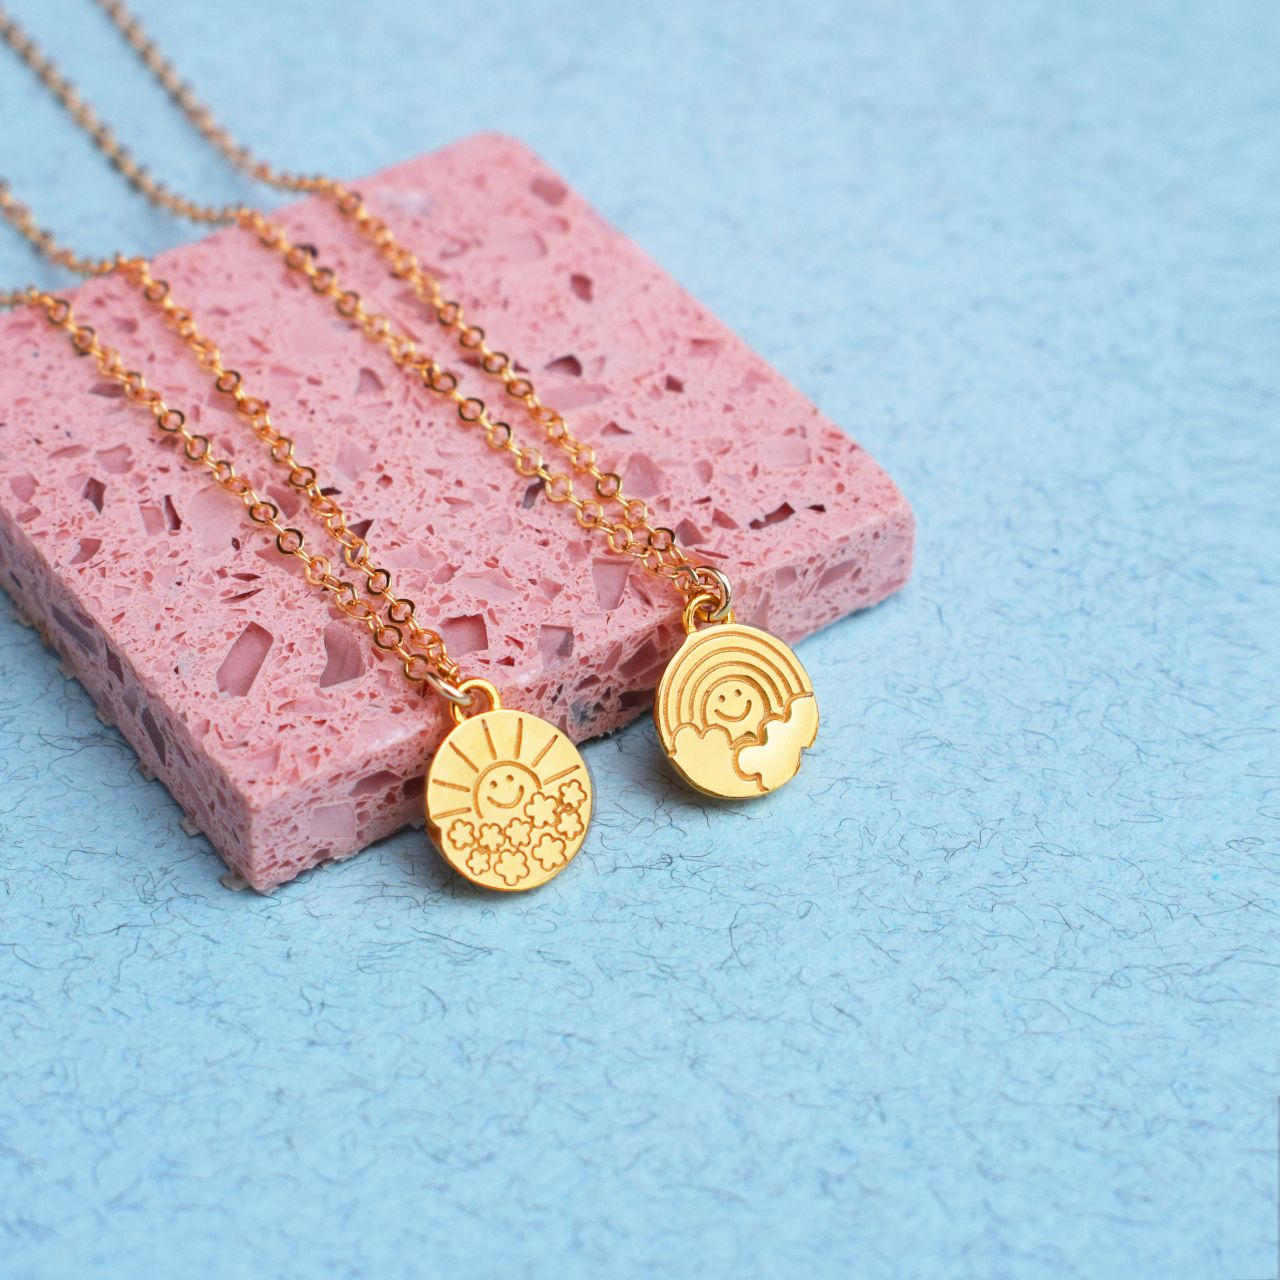 Happy Together necklaces by [Mood Good](https://moodgood.co.uk/shop/happy-together-necklaces)